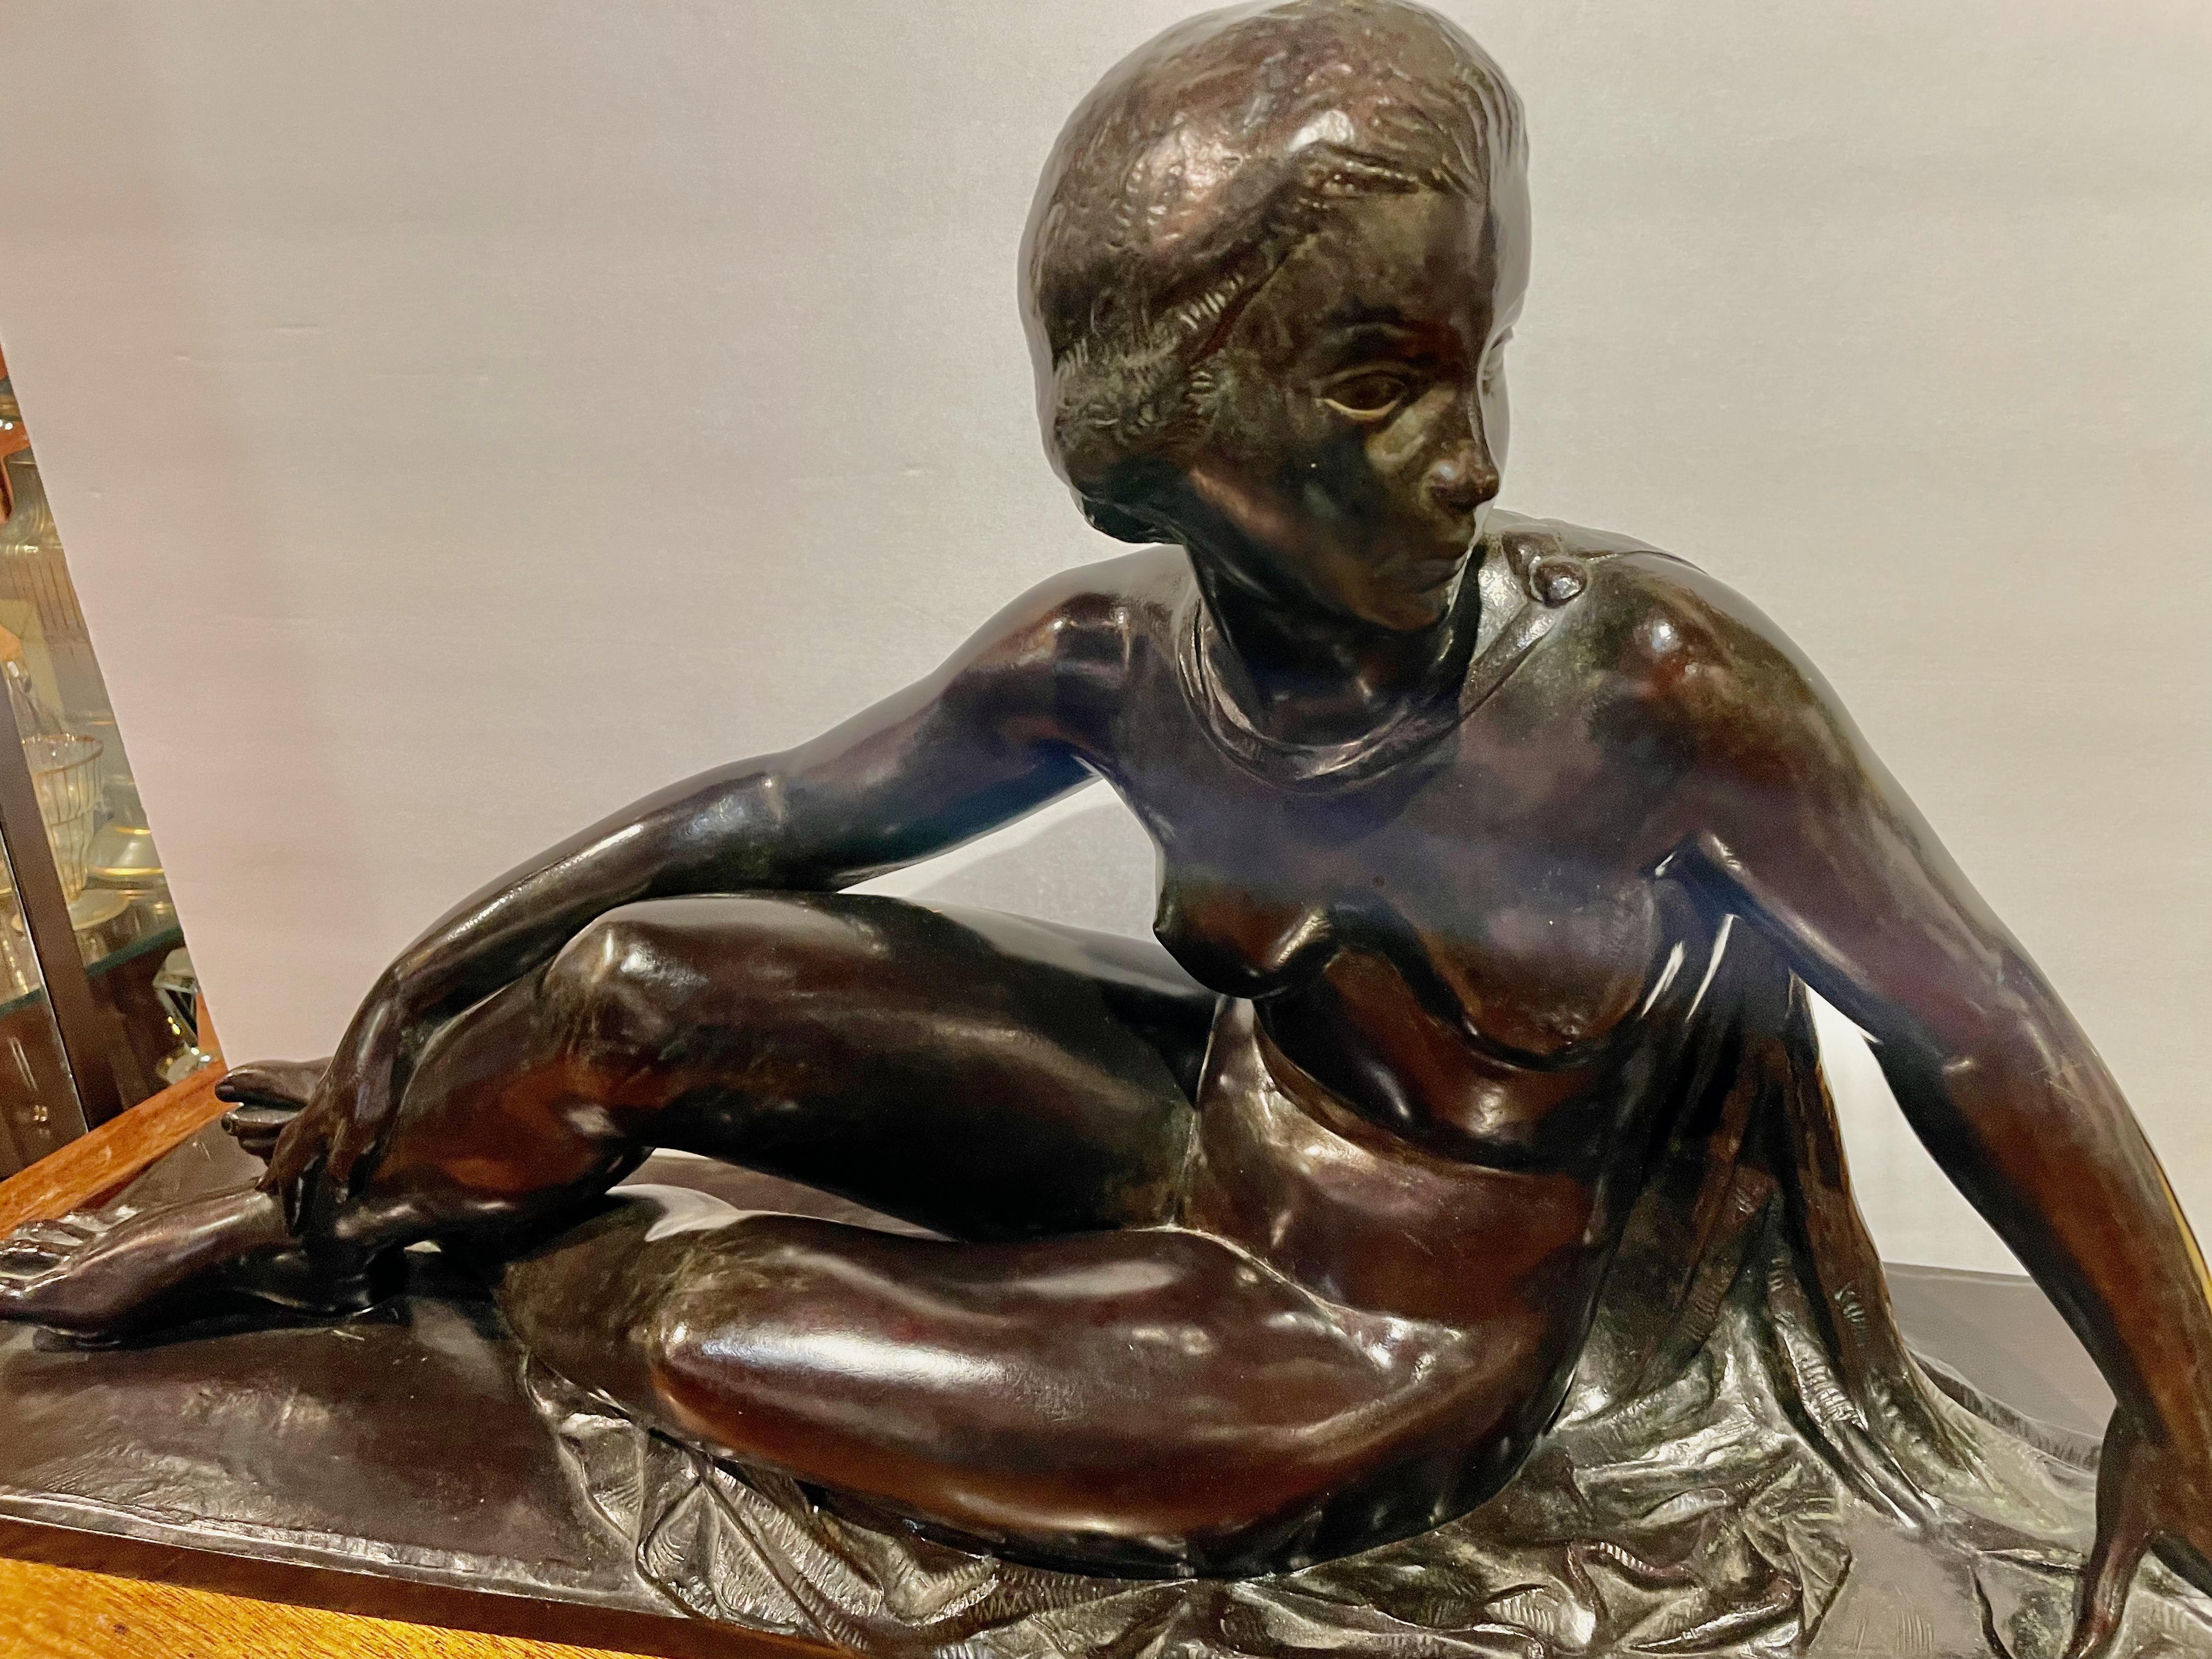 Auguste Guénot, French Art Deco Sculptor 1924 Reclining Female Model “Nymphe” 1st Edition. Influential artist with many monumental and public works. Auguste Guénot was born on October 25, 1882, in Toulouse (Haute-Garonne). Son of a master